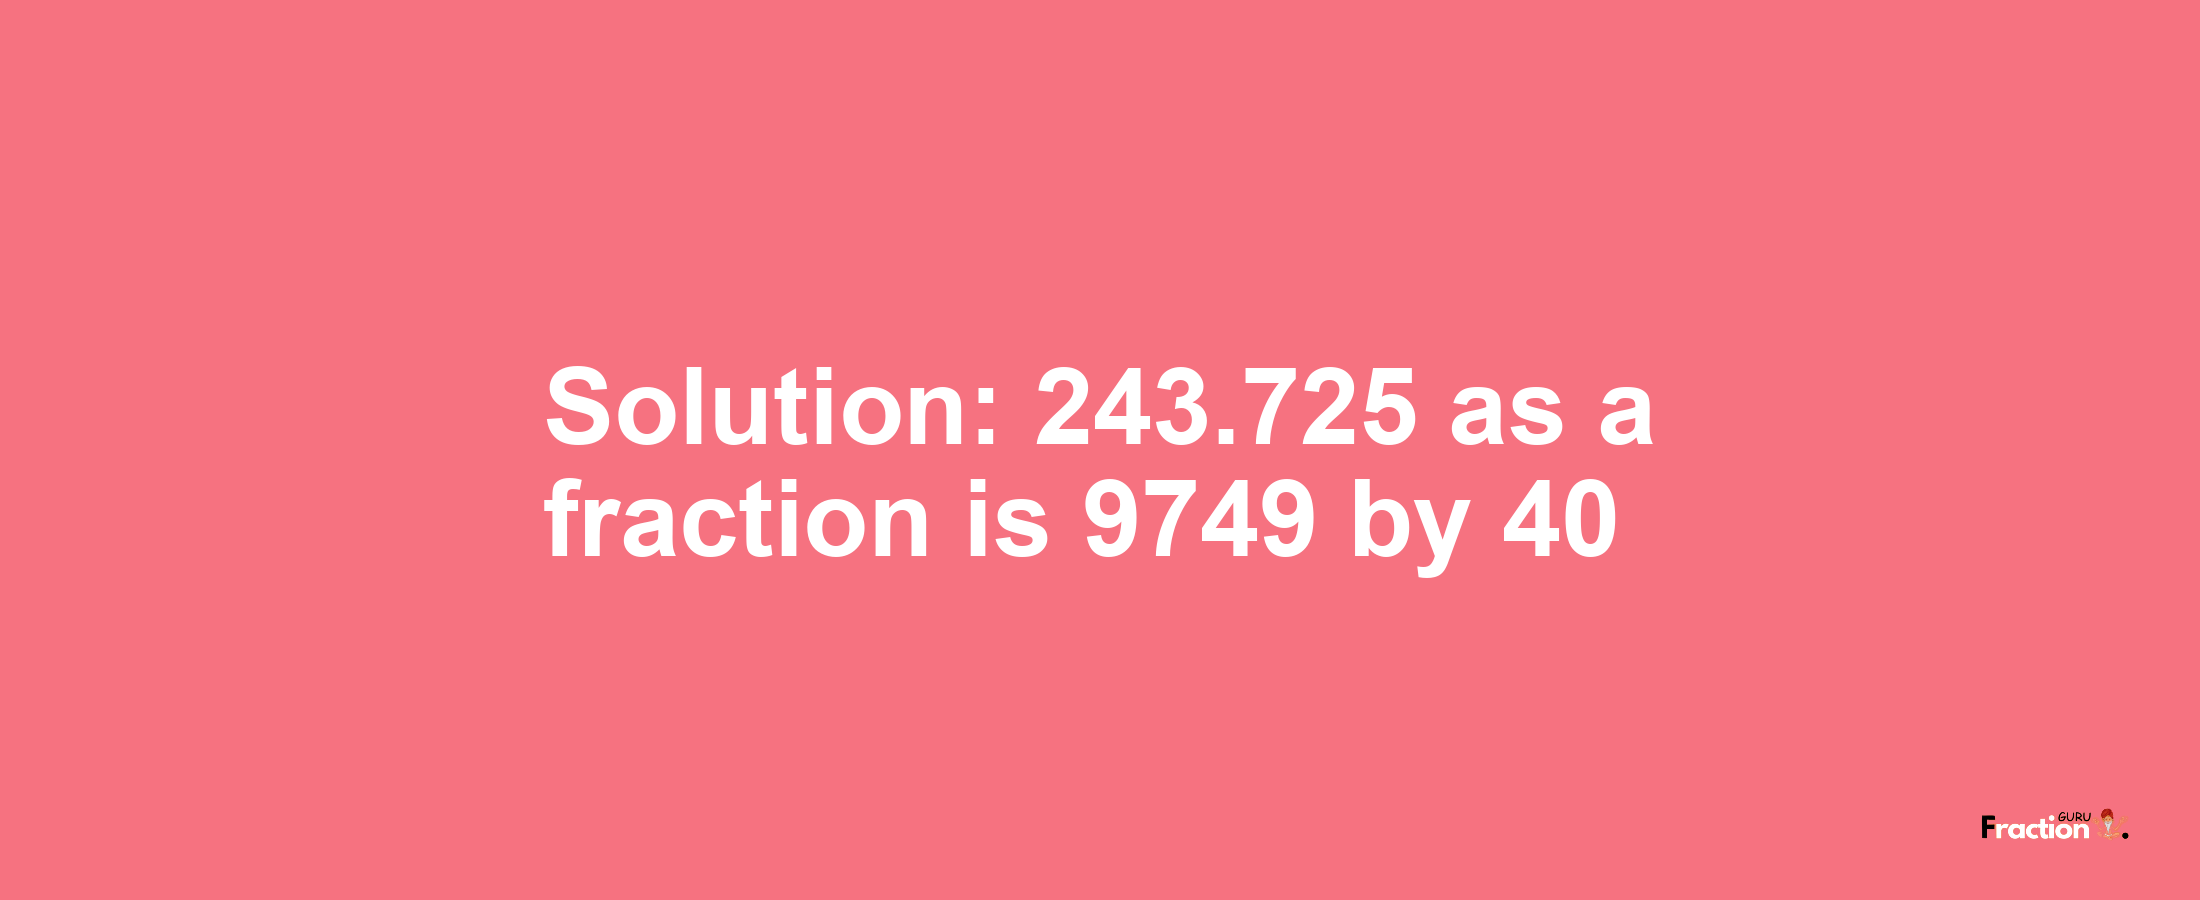 Solution:243.725 as a fraction is 9749/40